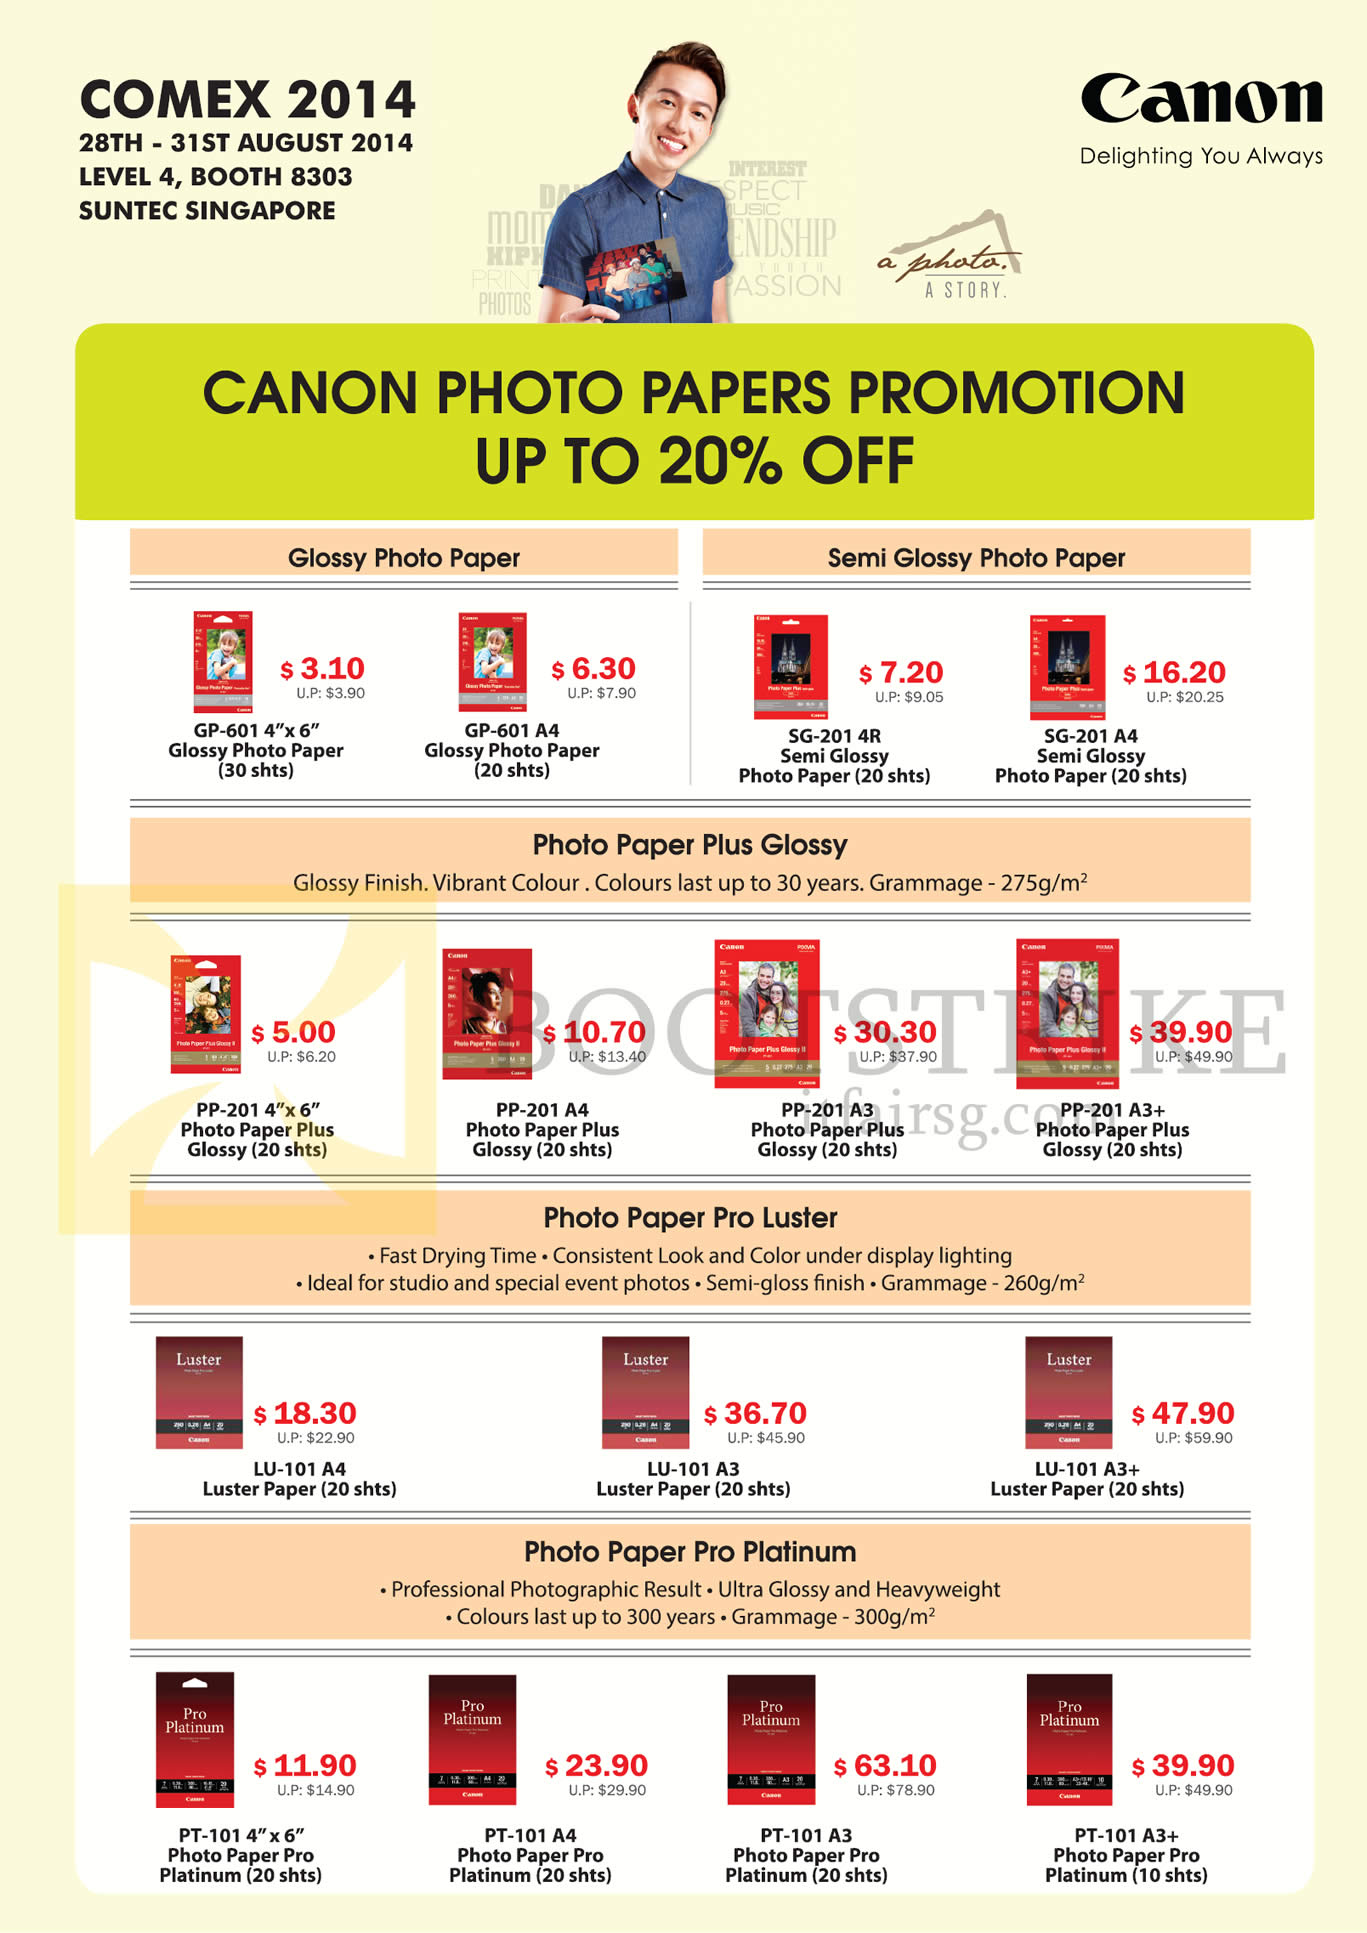 COMEX 2014 price list image brochure of Canon Photo Papers Glossy, Semi Glossy, Photo Paper Plus Glossy, Pro Luster, Pro Platinum